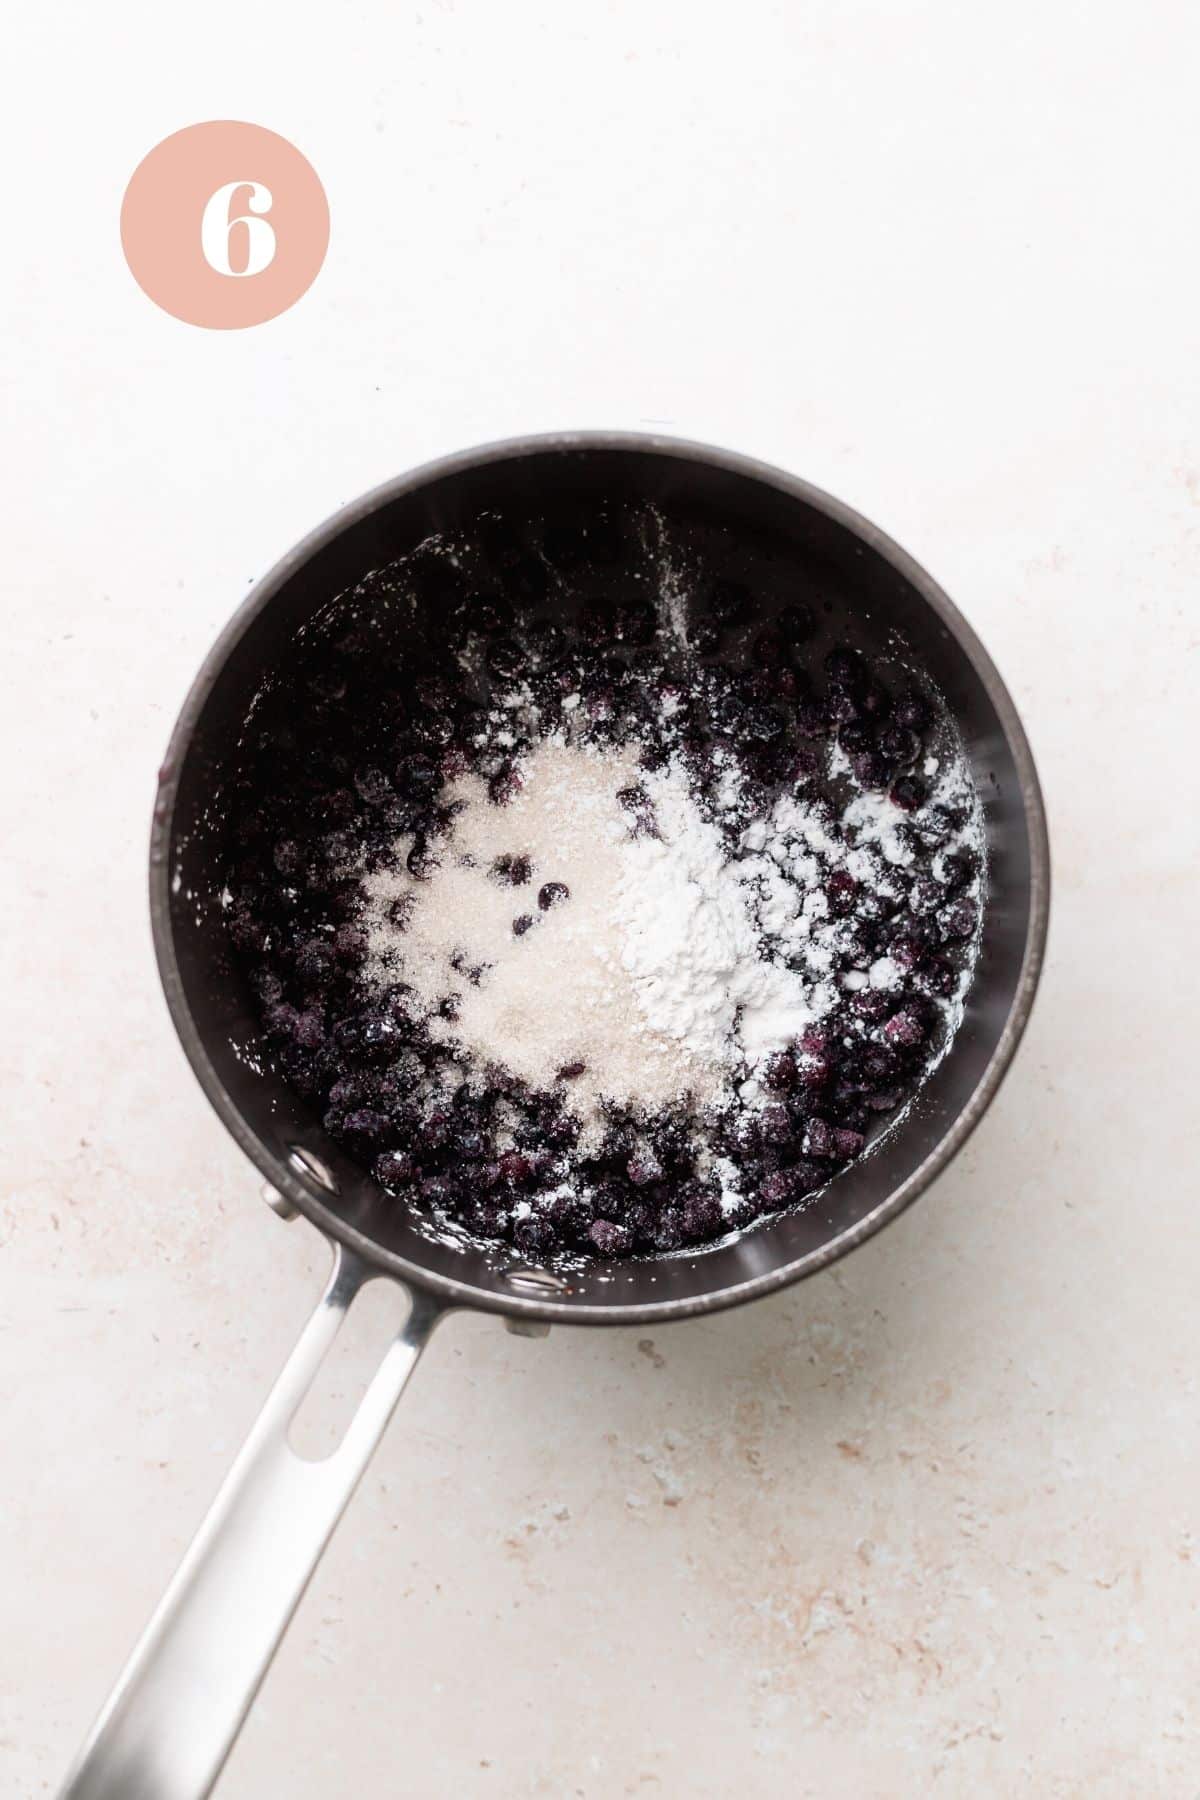 the blueberry compote in a pot for the earl grey cake.